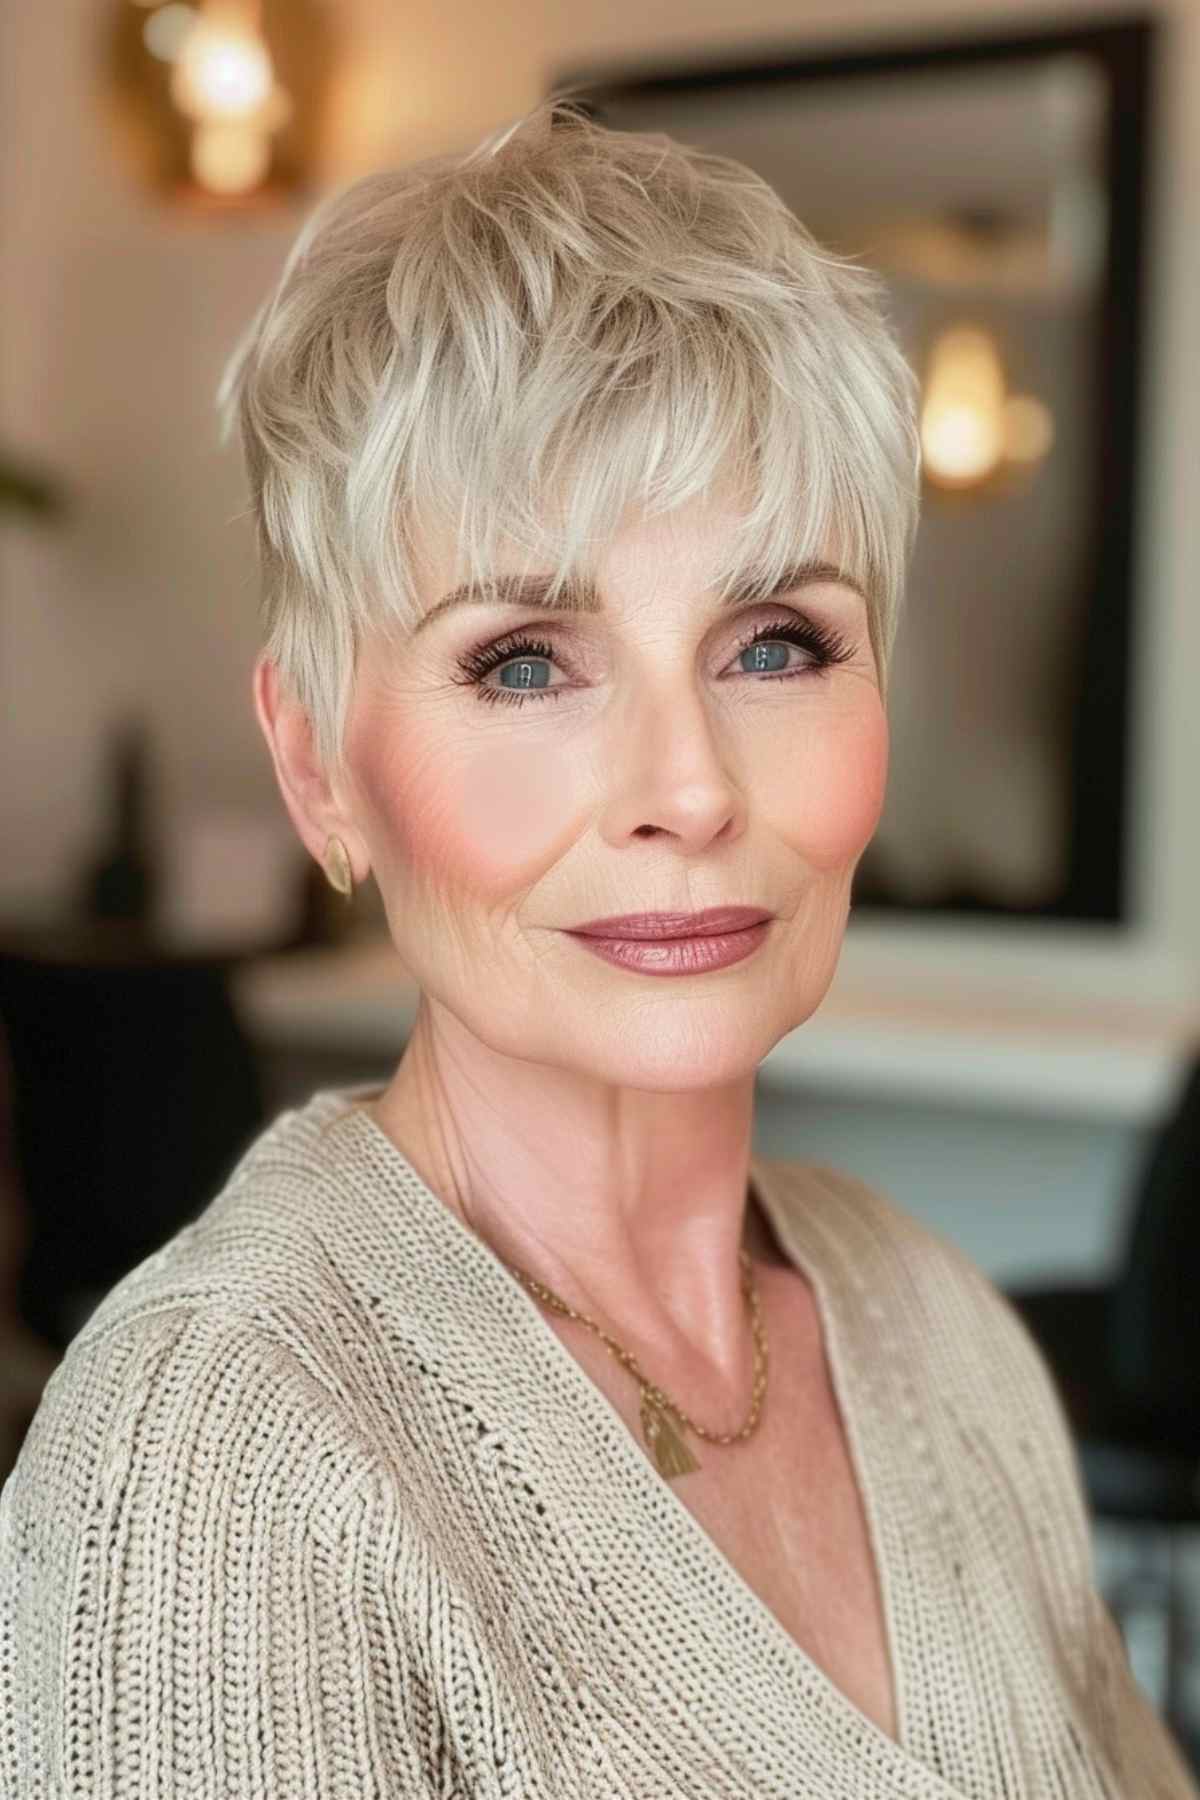 Mature woman with a stylishly textured pixie cut and soft bangs, wearing a cozy knit sweater.